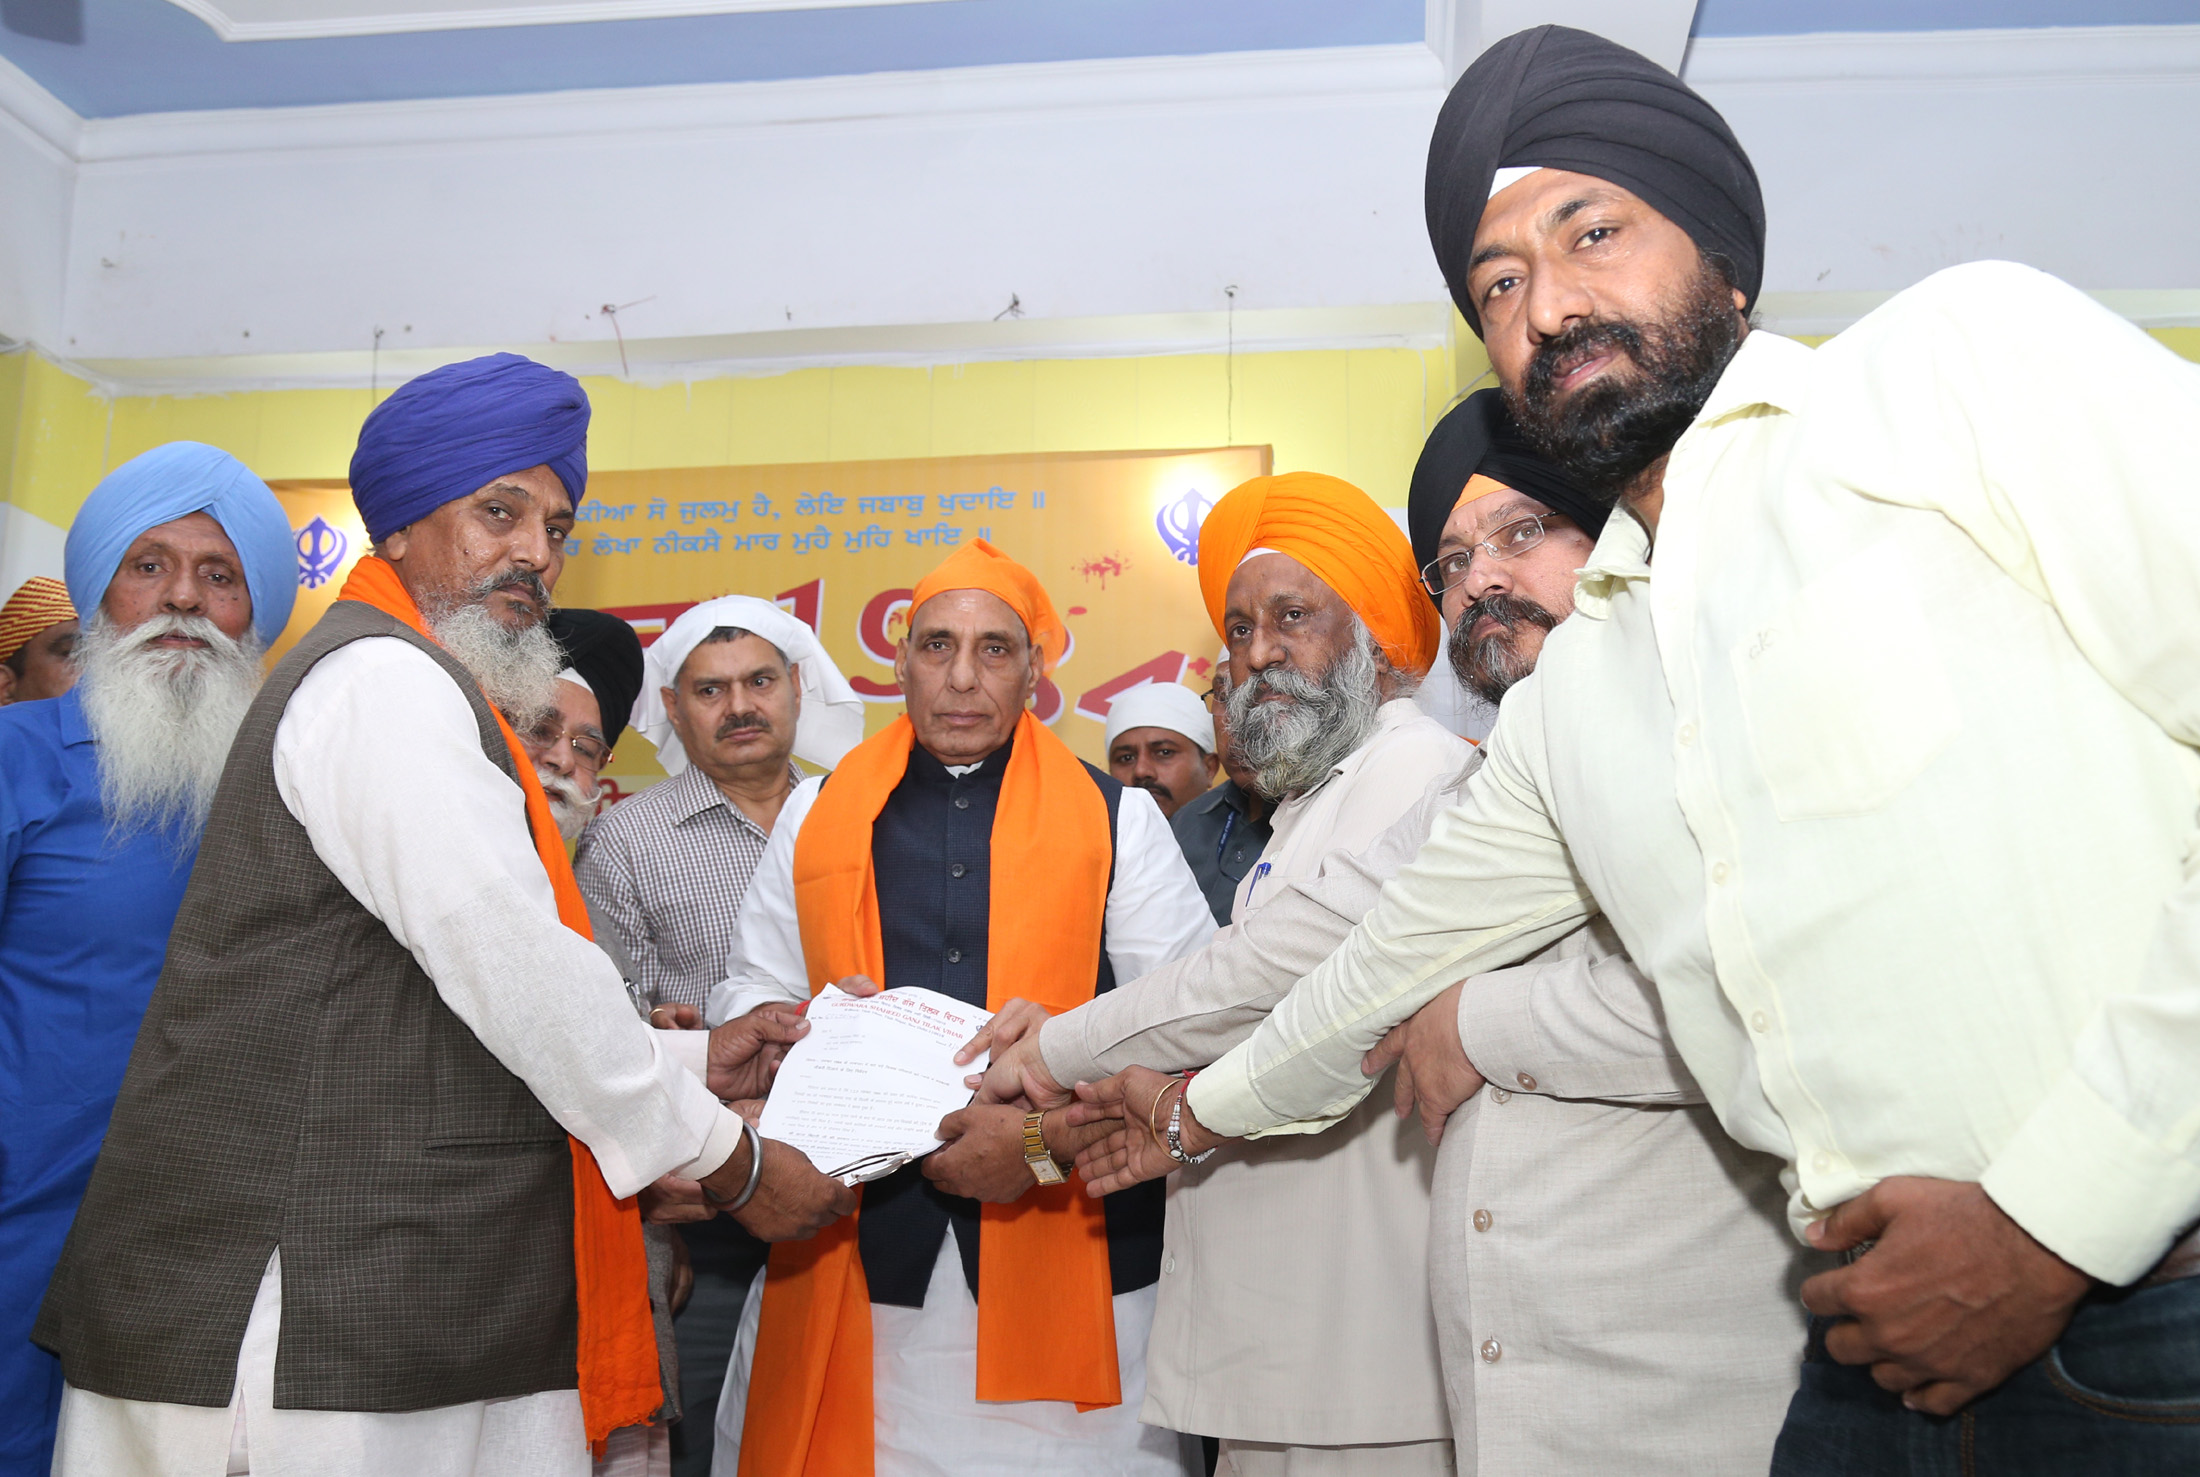 The Union Home Minister, Shri Rajnath Singh receiving a memorandum, during a programme to mark the anniversary of the 1984 Sikh riot victims, in New Delhi on November 02, 2016.